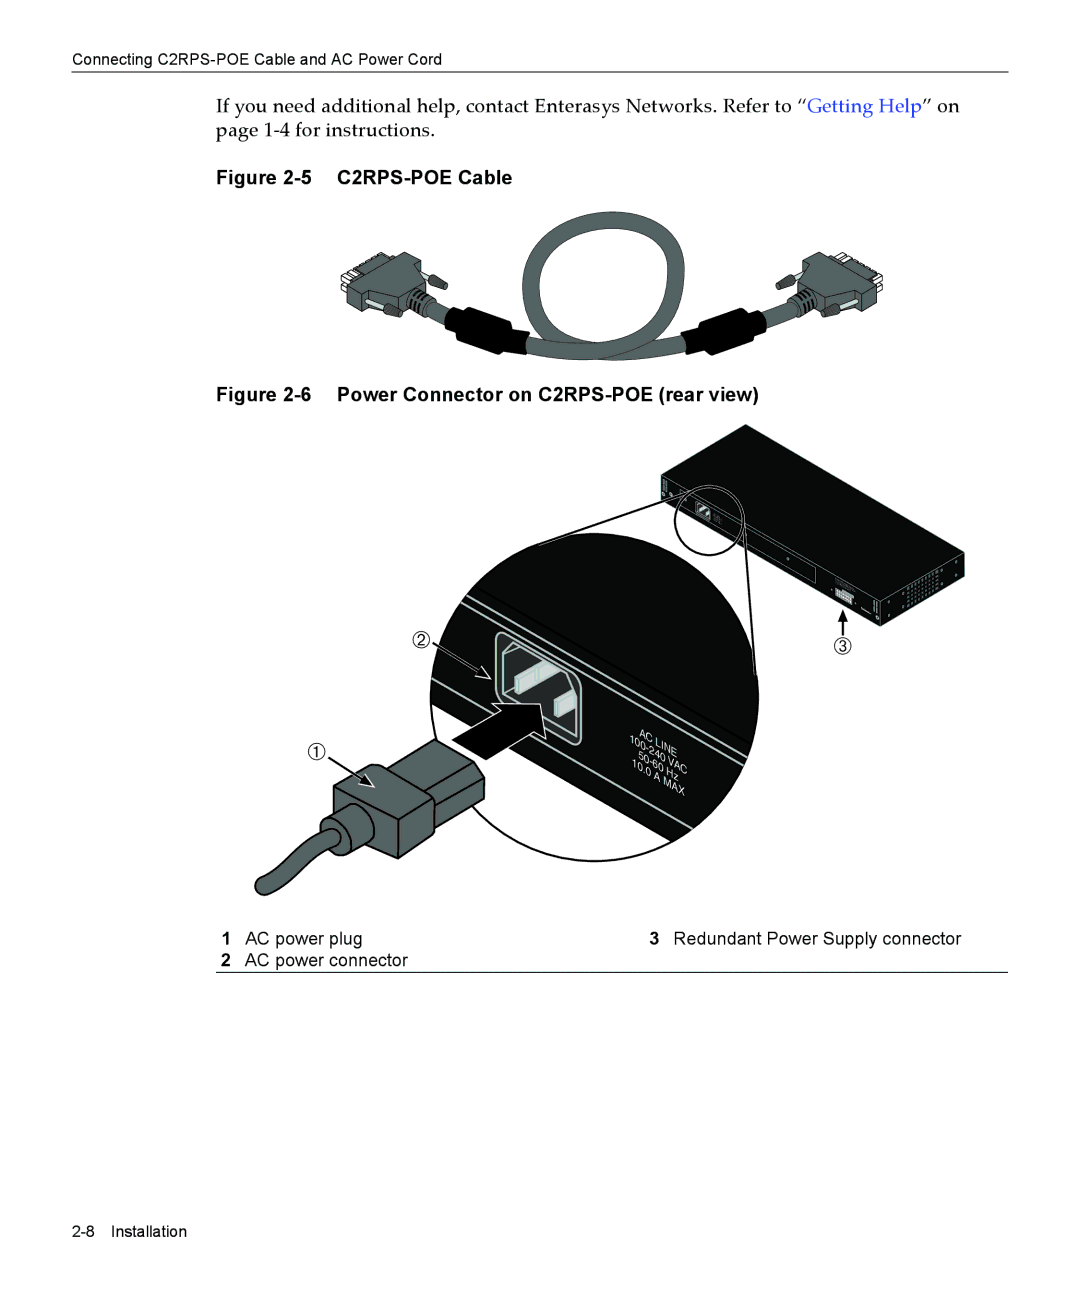 Enterasys Networks manual C2RPS-POE Cable 